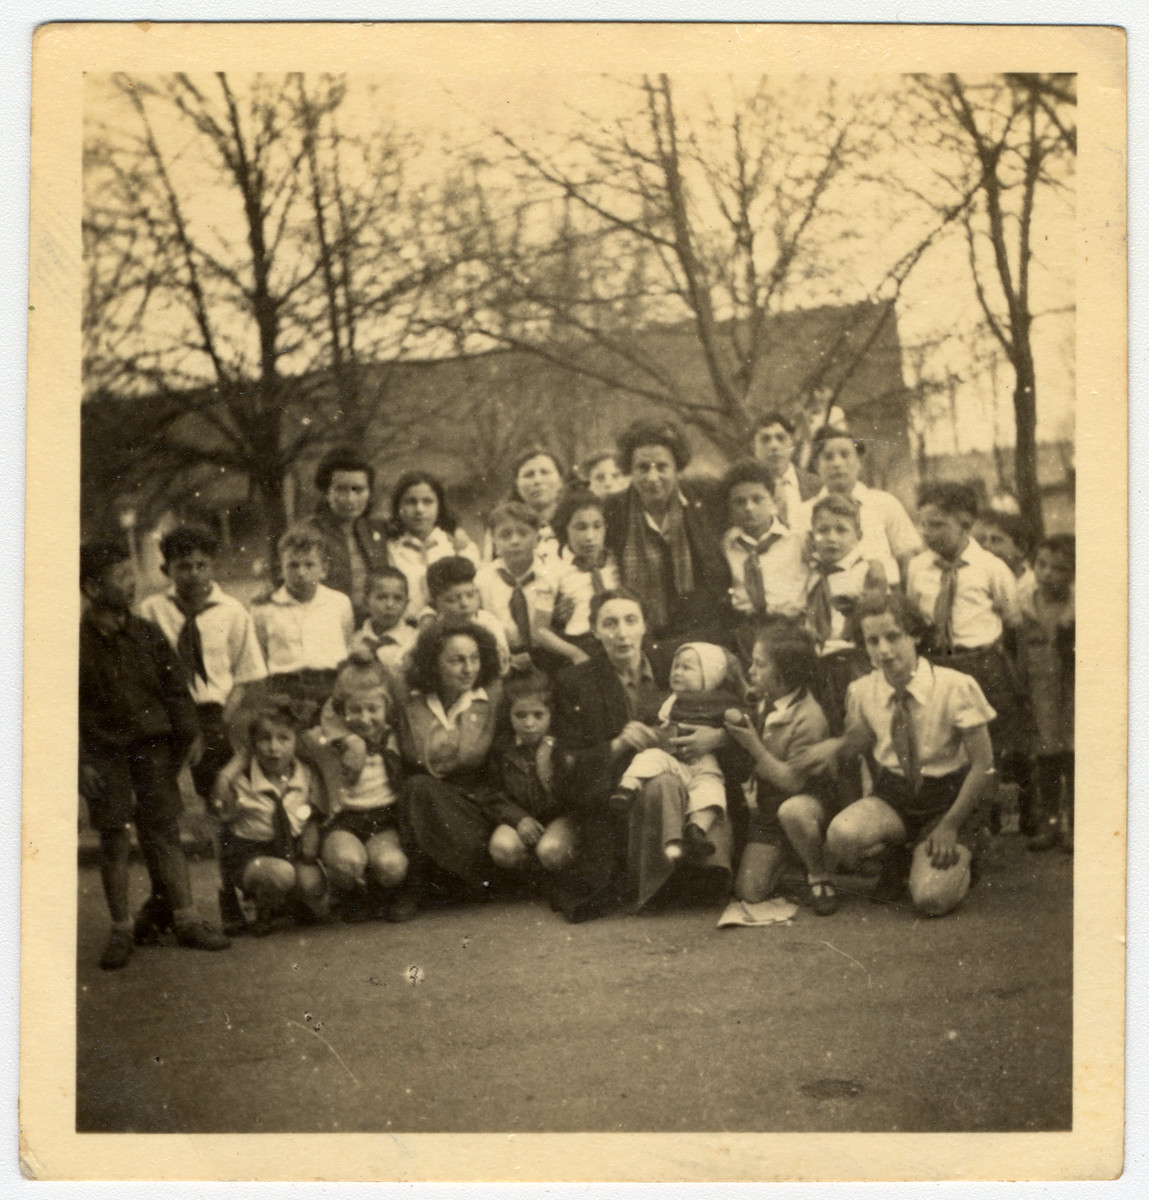 Group portrait of children in an orphanage in Israel.

Among those pictured is Sala Perec (front row, far right).